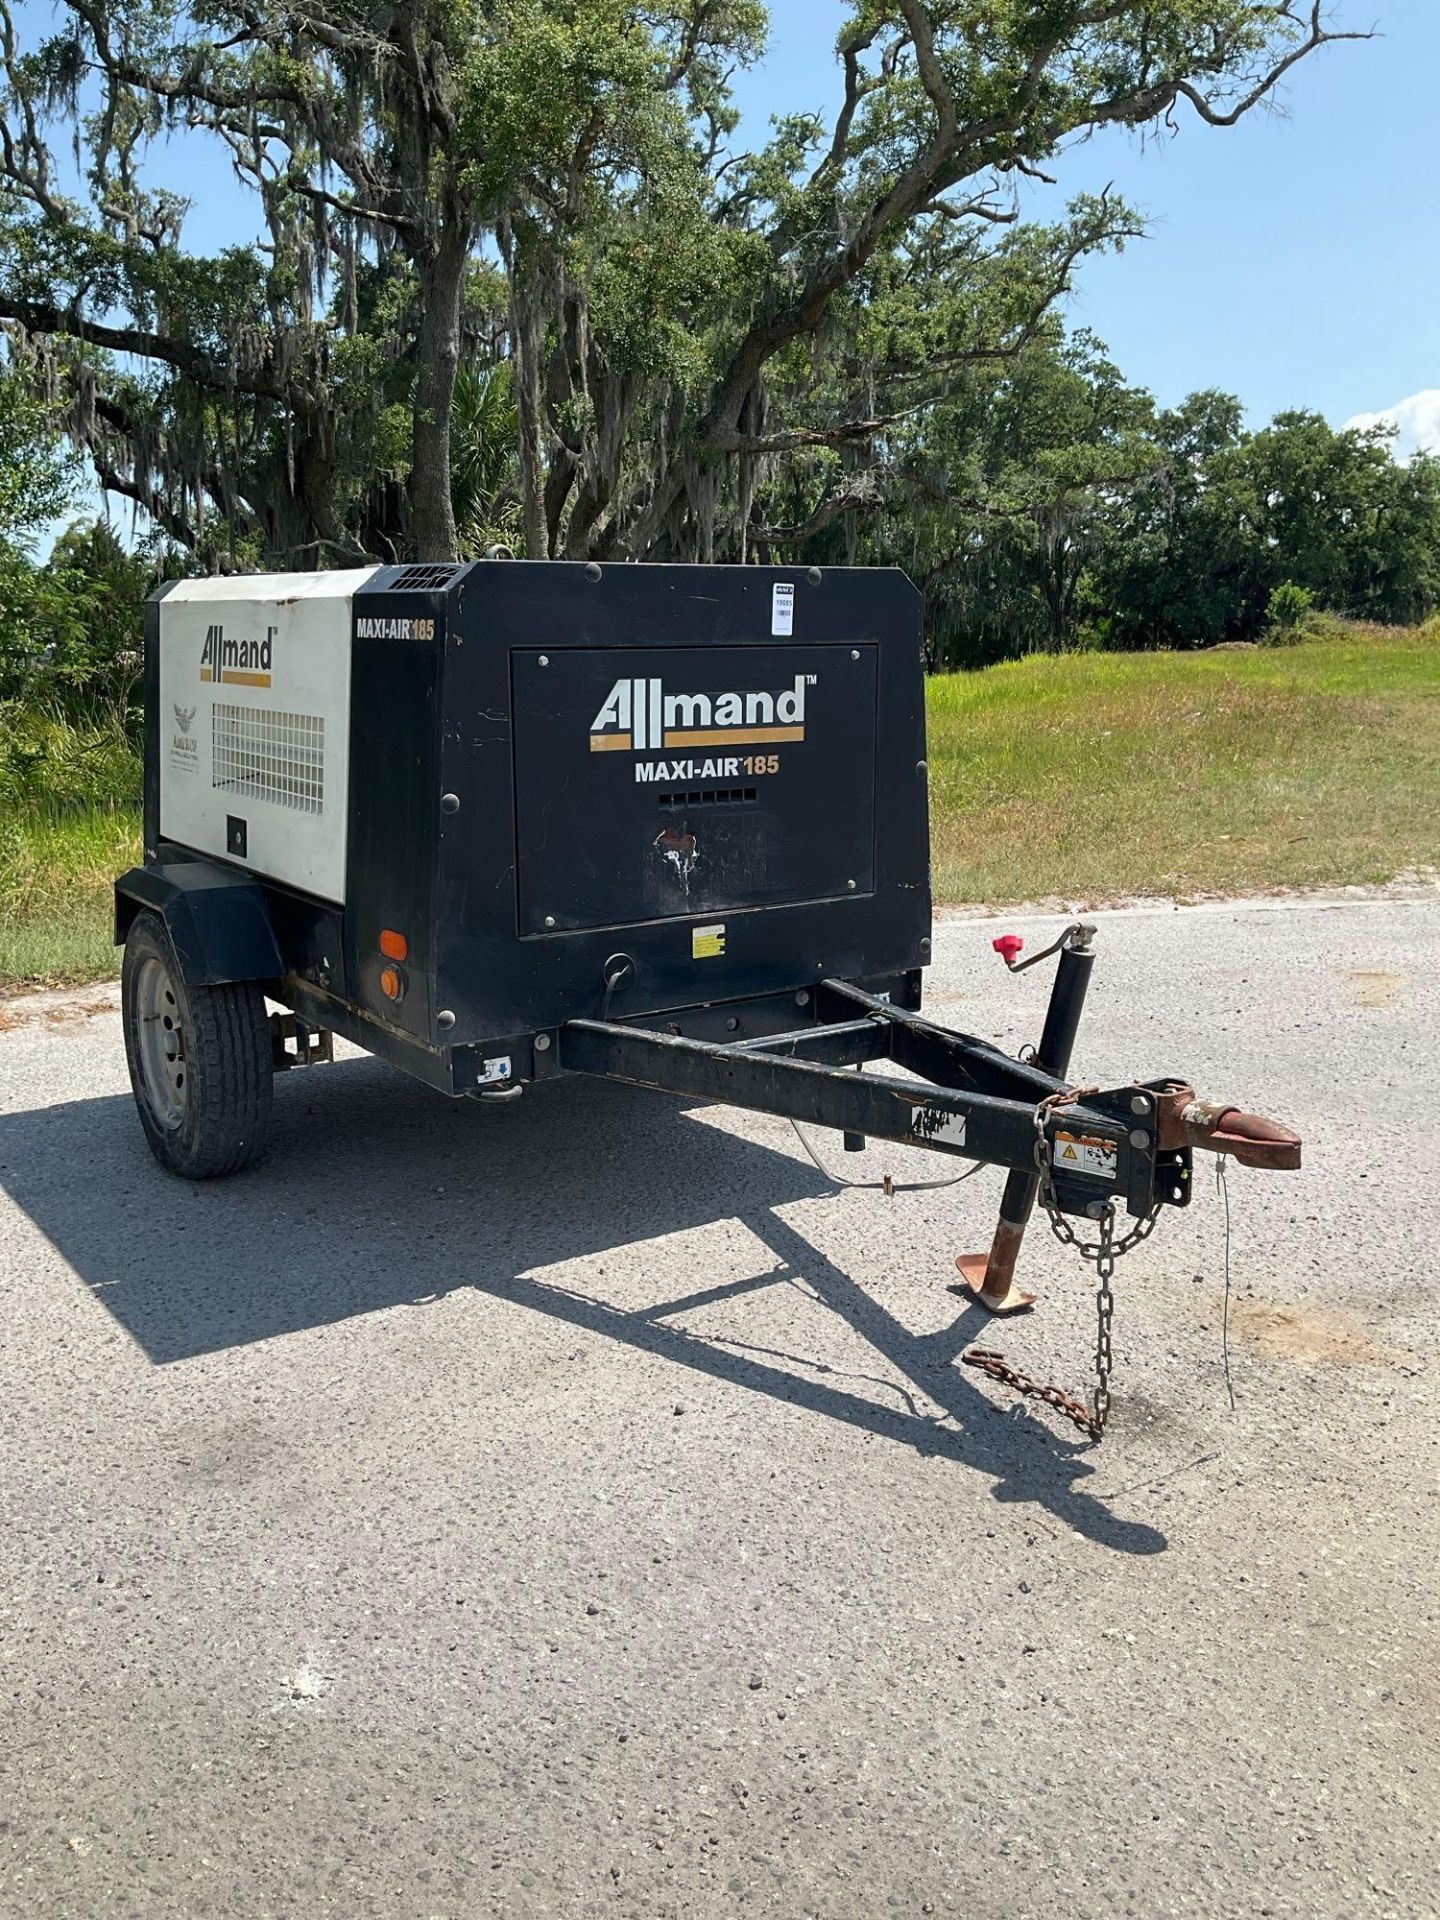 2018/2019 ALLMAND MAXI-POWER MA185-6E1 COMPRESSOR, DIESEL, TRAILER MOUNTED, NORMAL OPERATING - Image 10 of 14